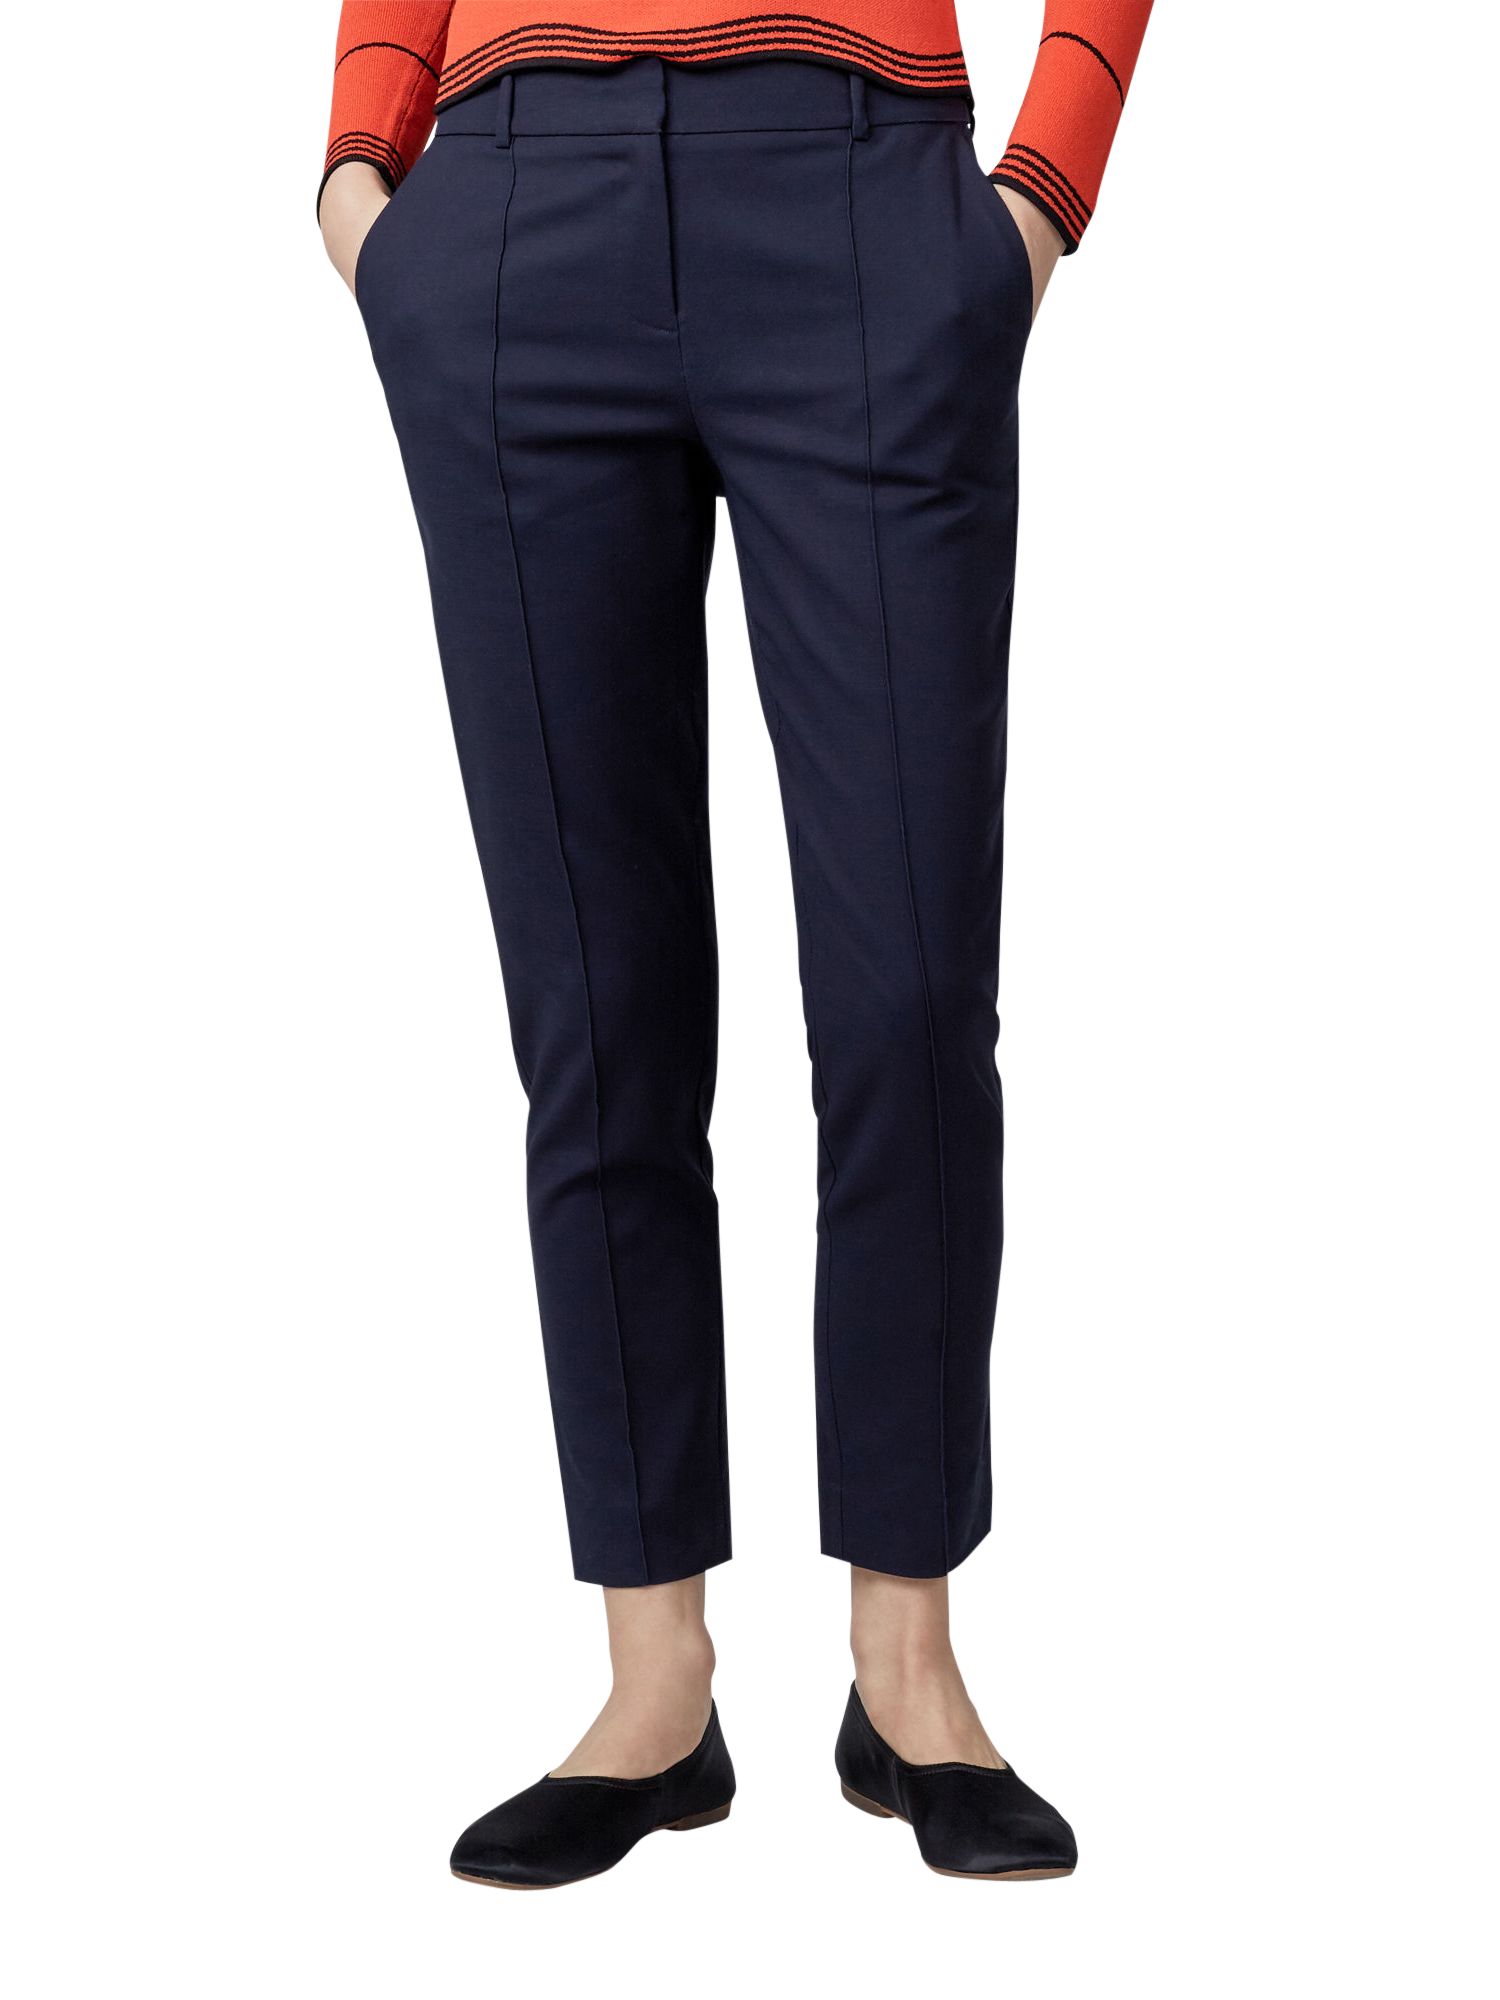 Warehouse Compact Cotton Trousers, Navy, 8